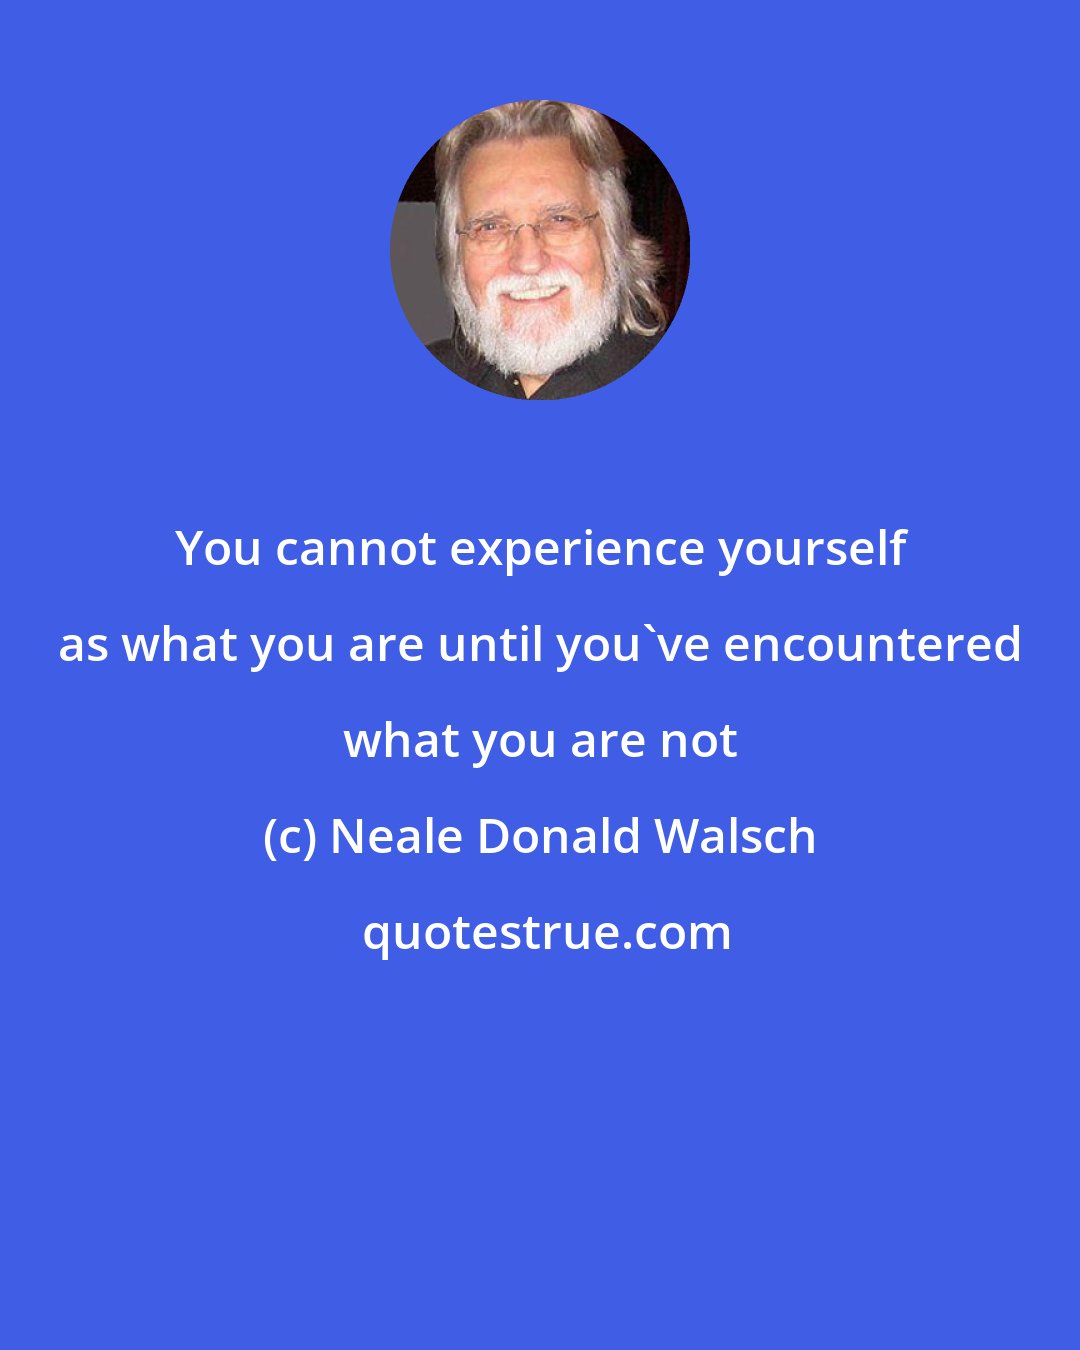 Neale Donald Walsch: You cannot experience yourself as what you are until you've encountered what you are not